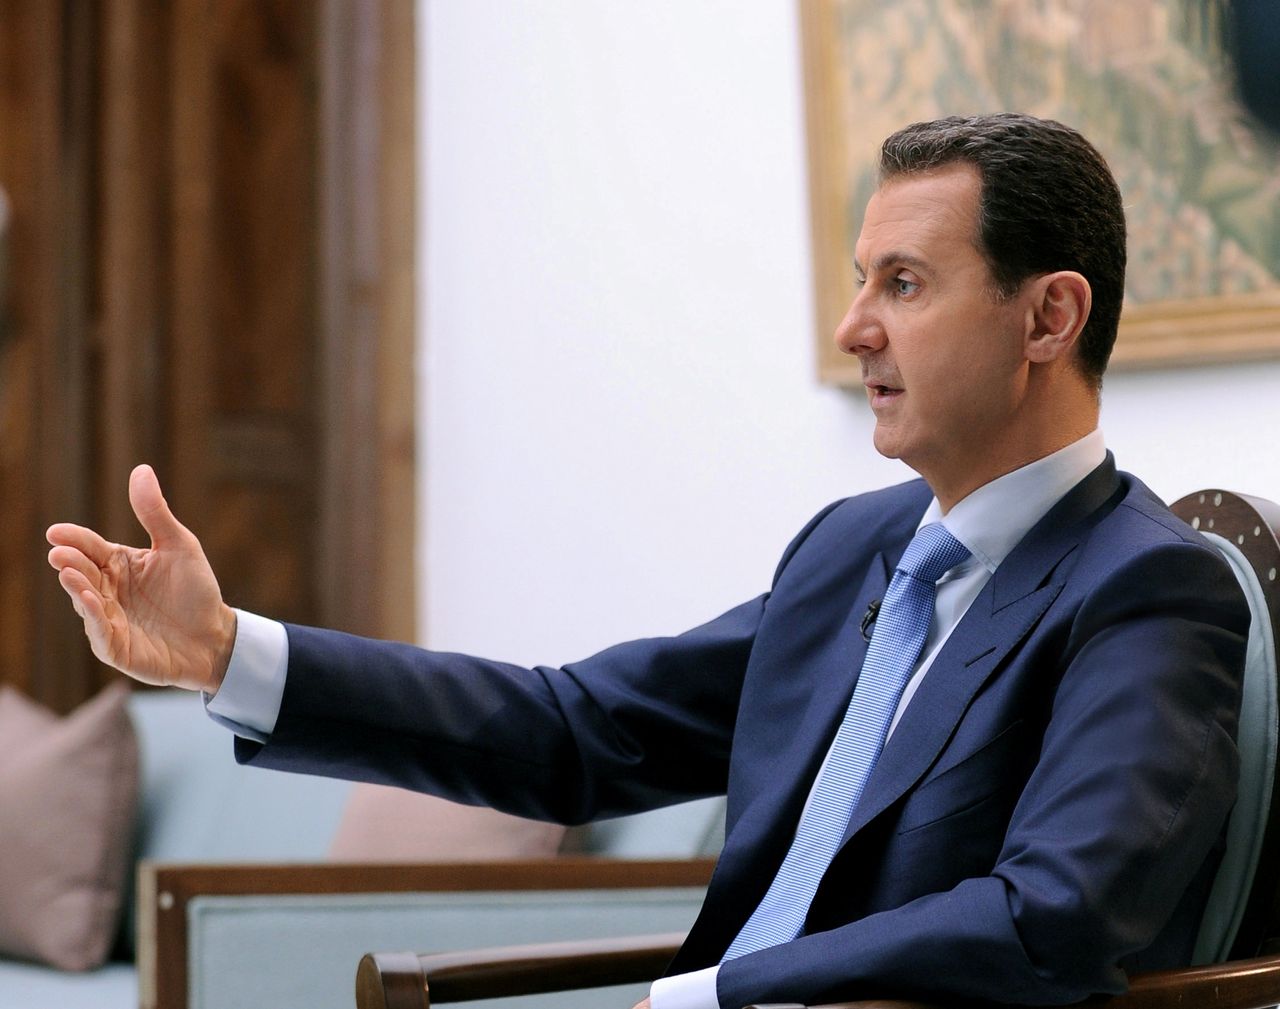 Before jumping to conclusions about Assad's guilt, an independent investigation must be conducted.